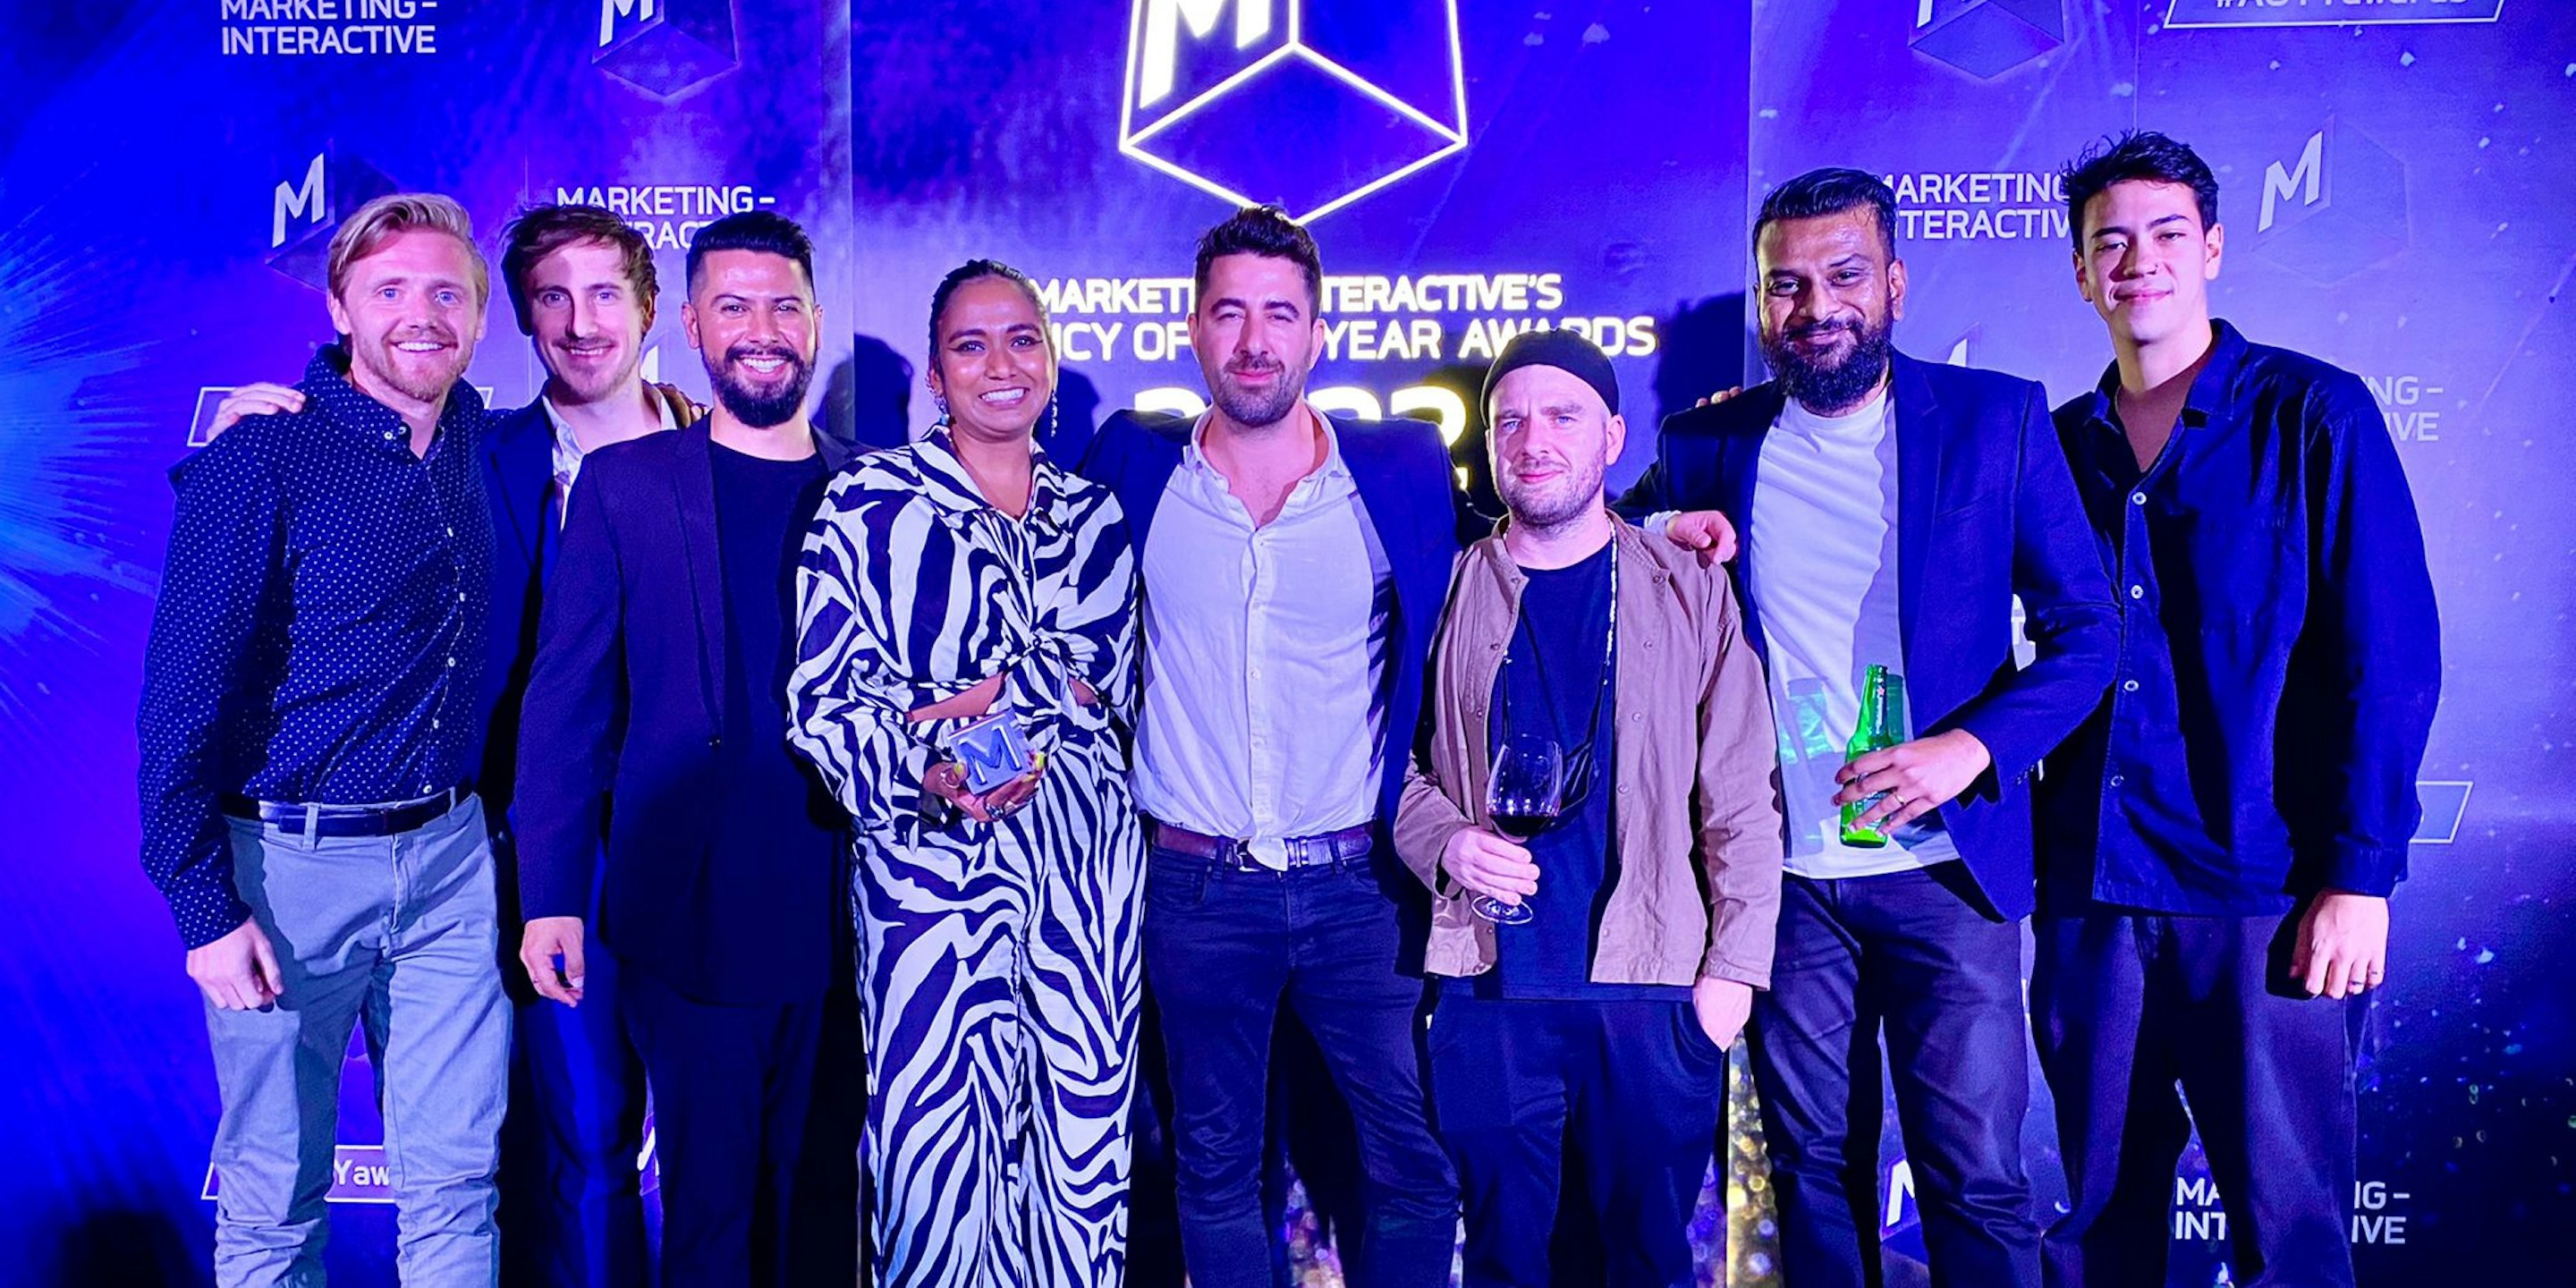 Awards | electriclime° win silver at MARKETING-INTERACTIVE Agency of the Year Awards 2022